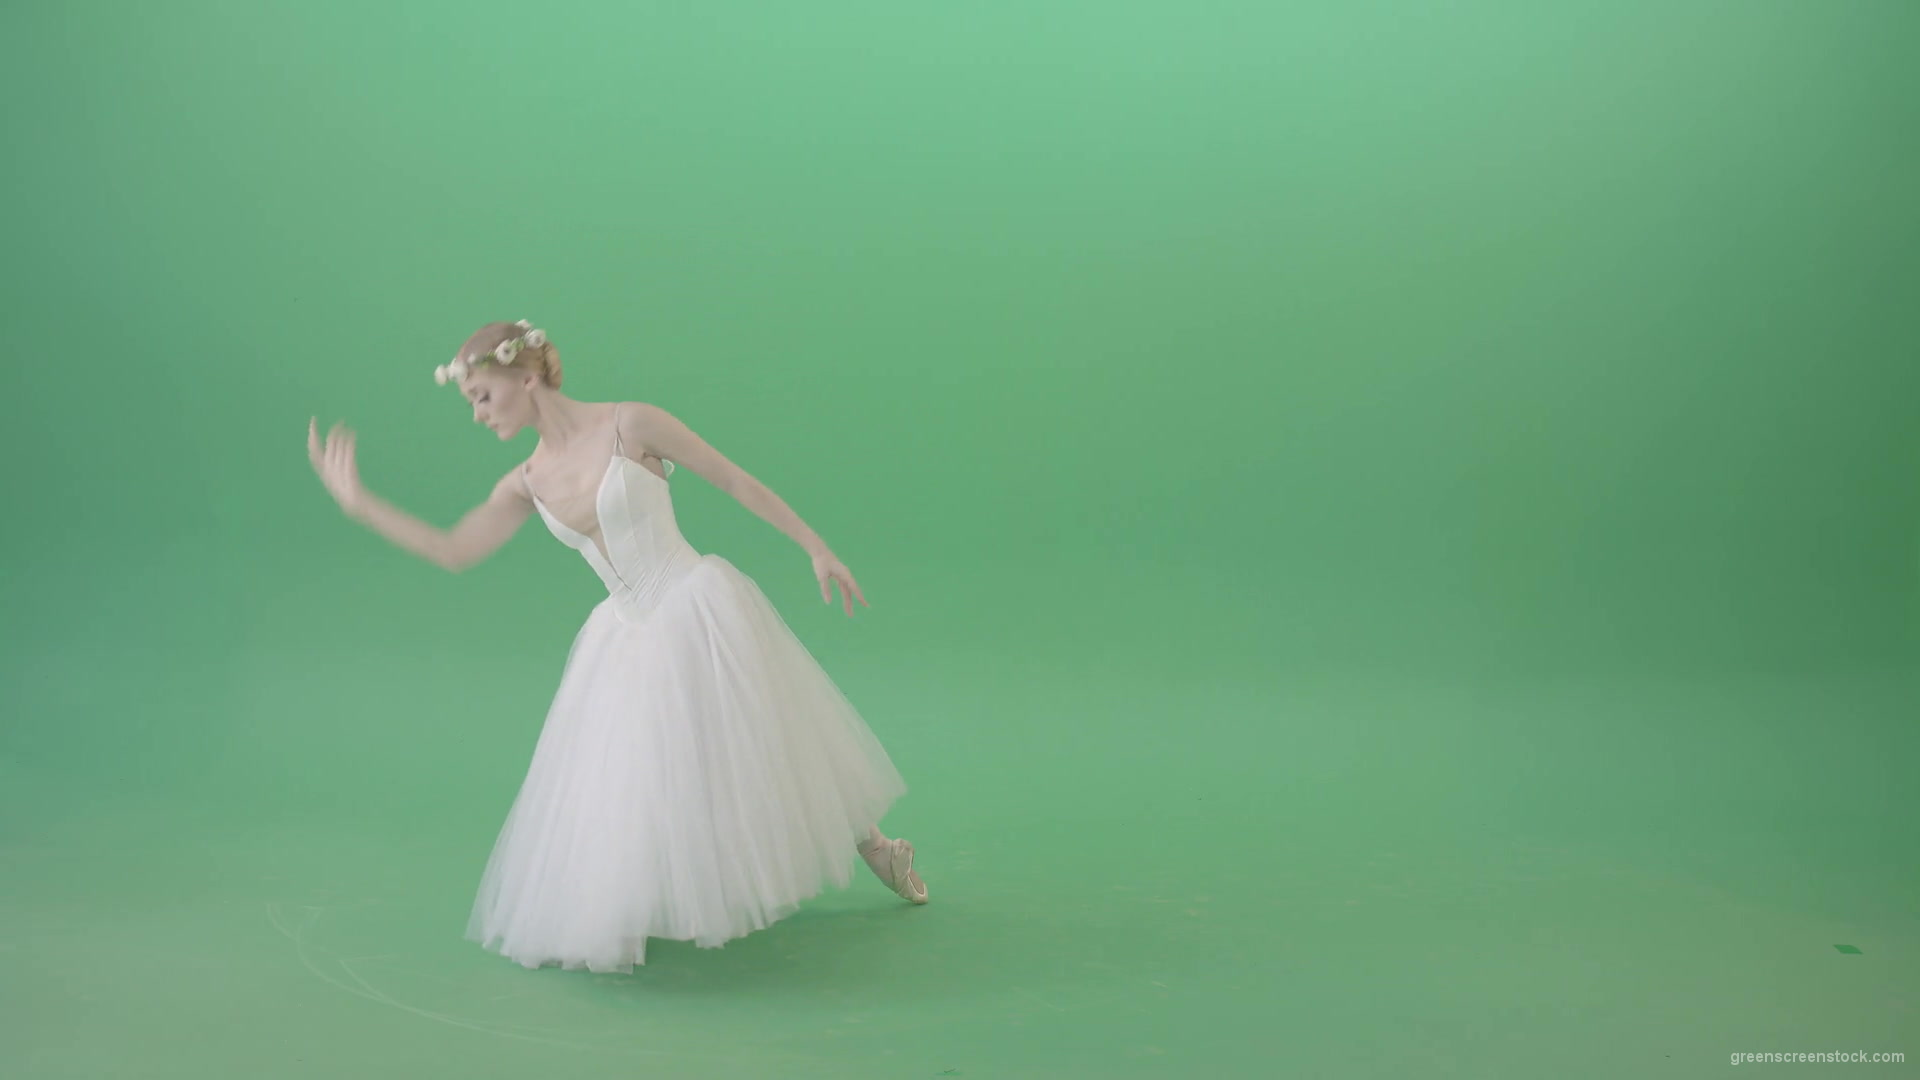 Blonde-Girl-in-elegant-white-wedding-dress-mowing-away-and-dancing-ballet-art-isolated-on-green-screen-4K-Video-Footage-1920_008 Green Screen Stock